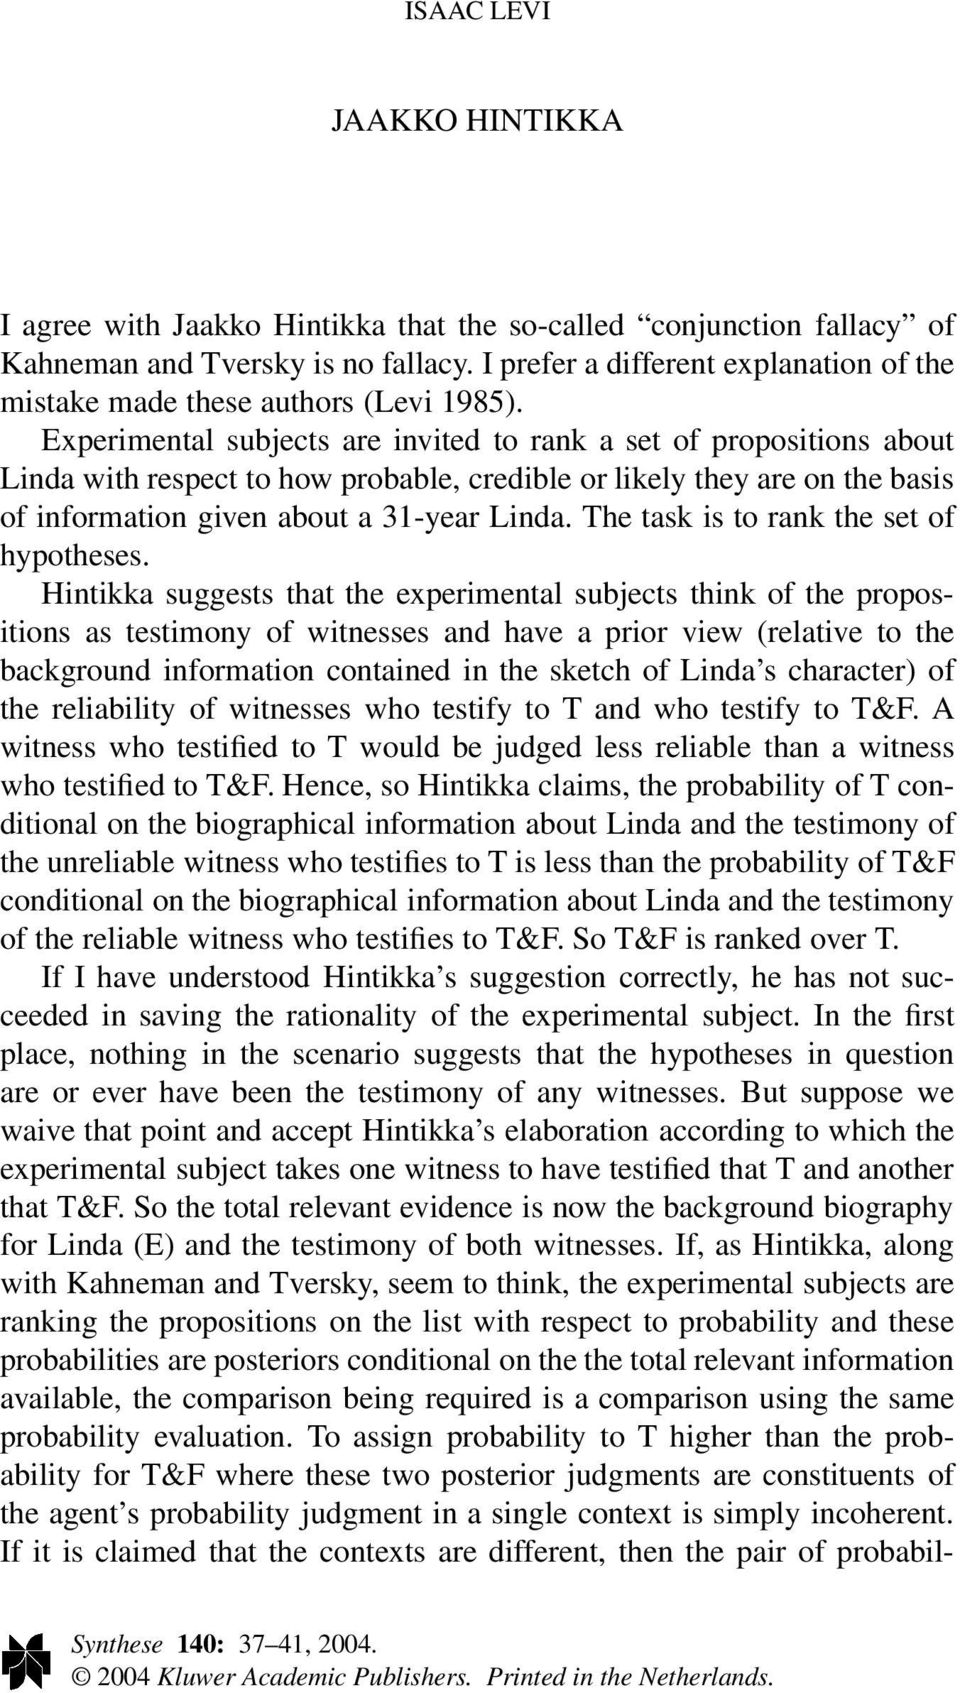 Experimental subjects are invited to rank a set of propositions about Linda with respect to how probable, credible or likely they are on the basis of information given about a 31-year Linda.